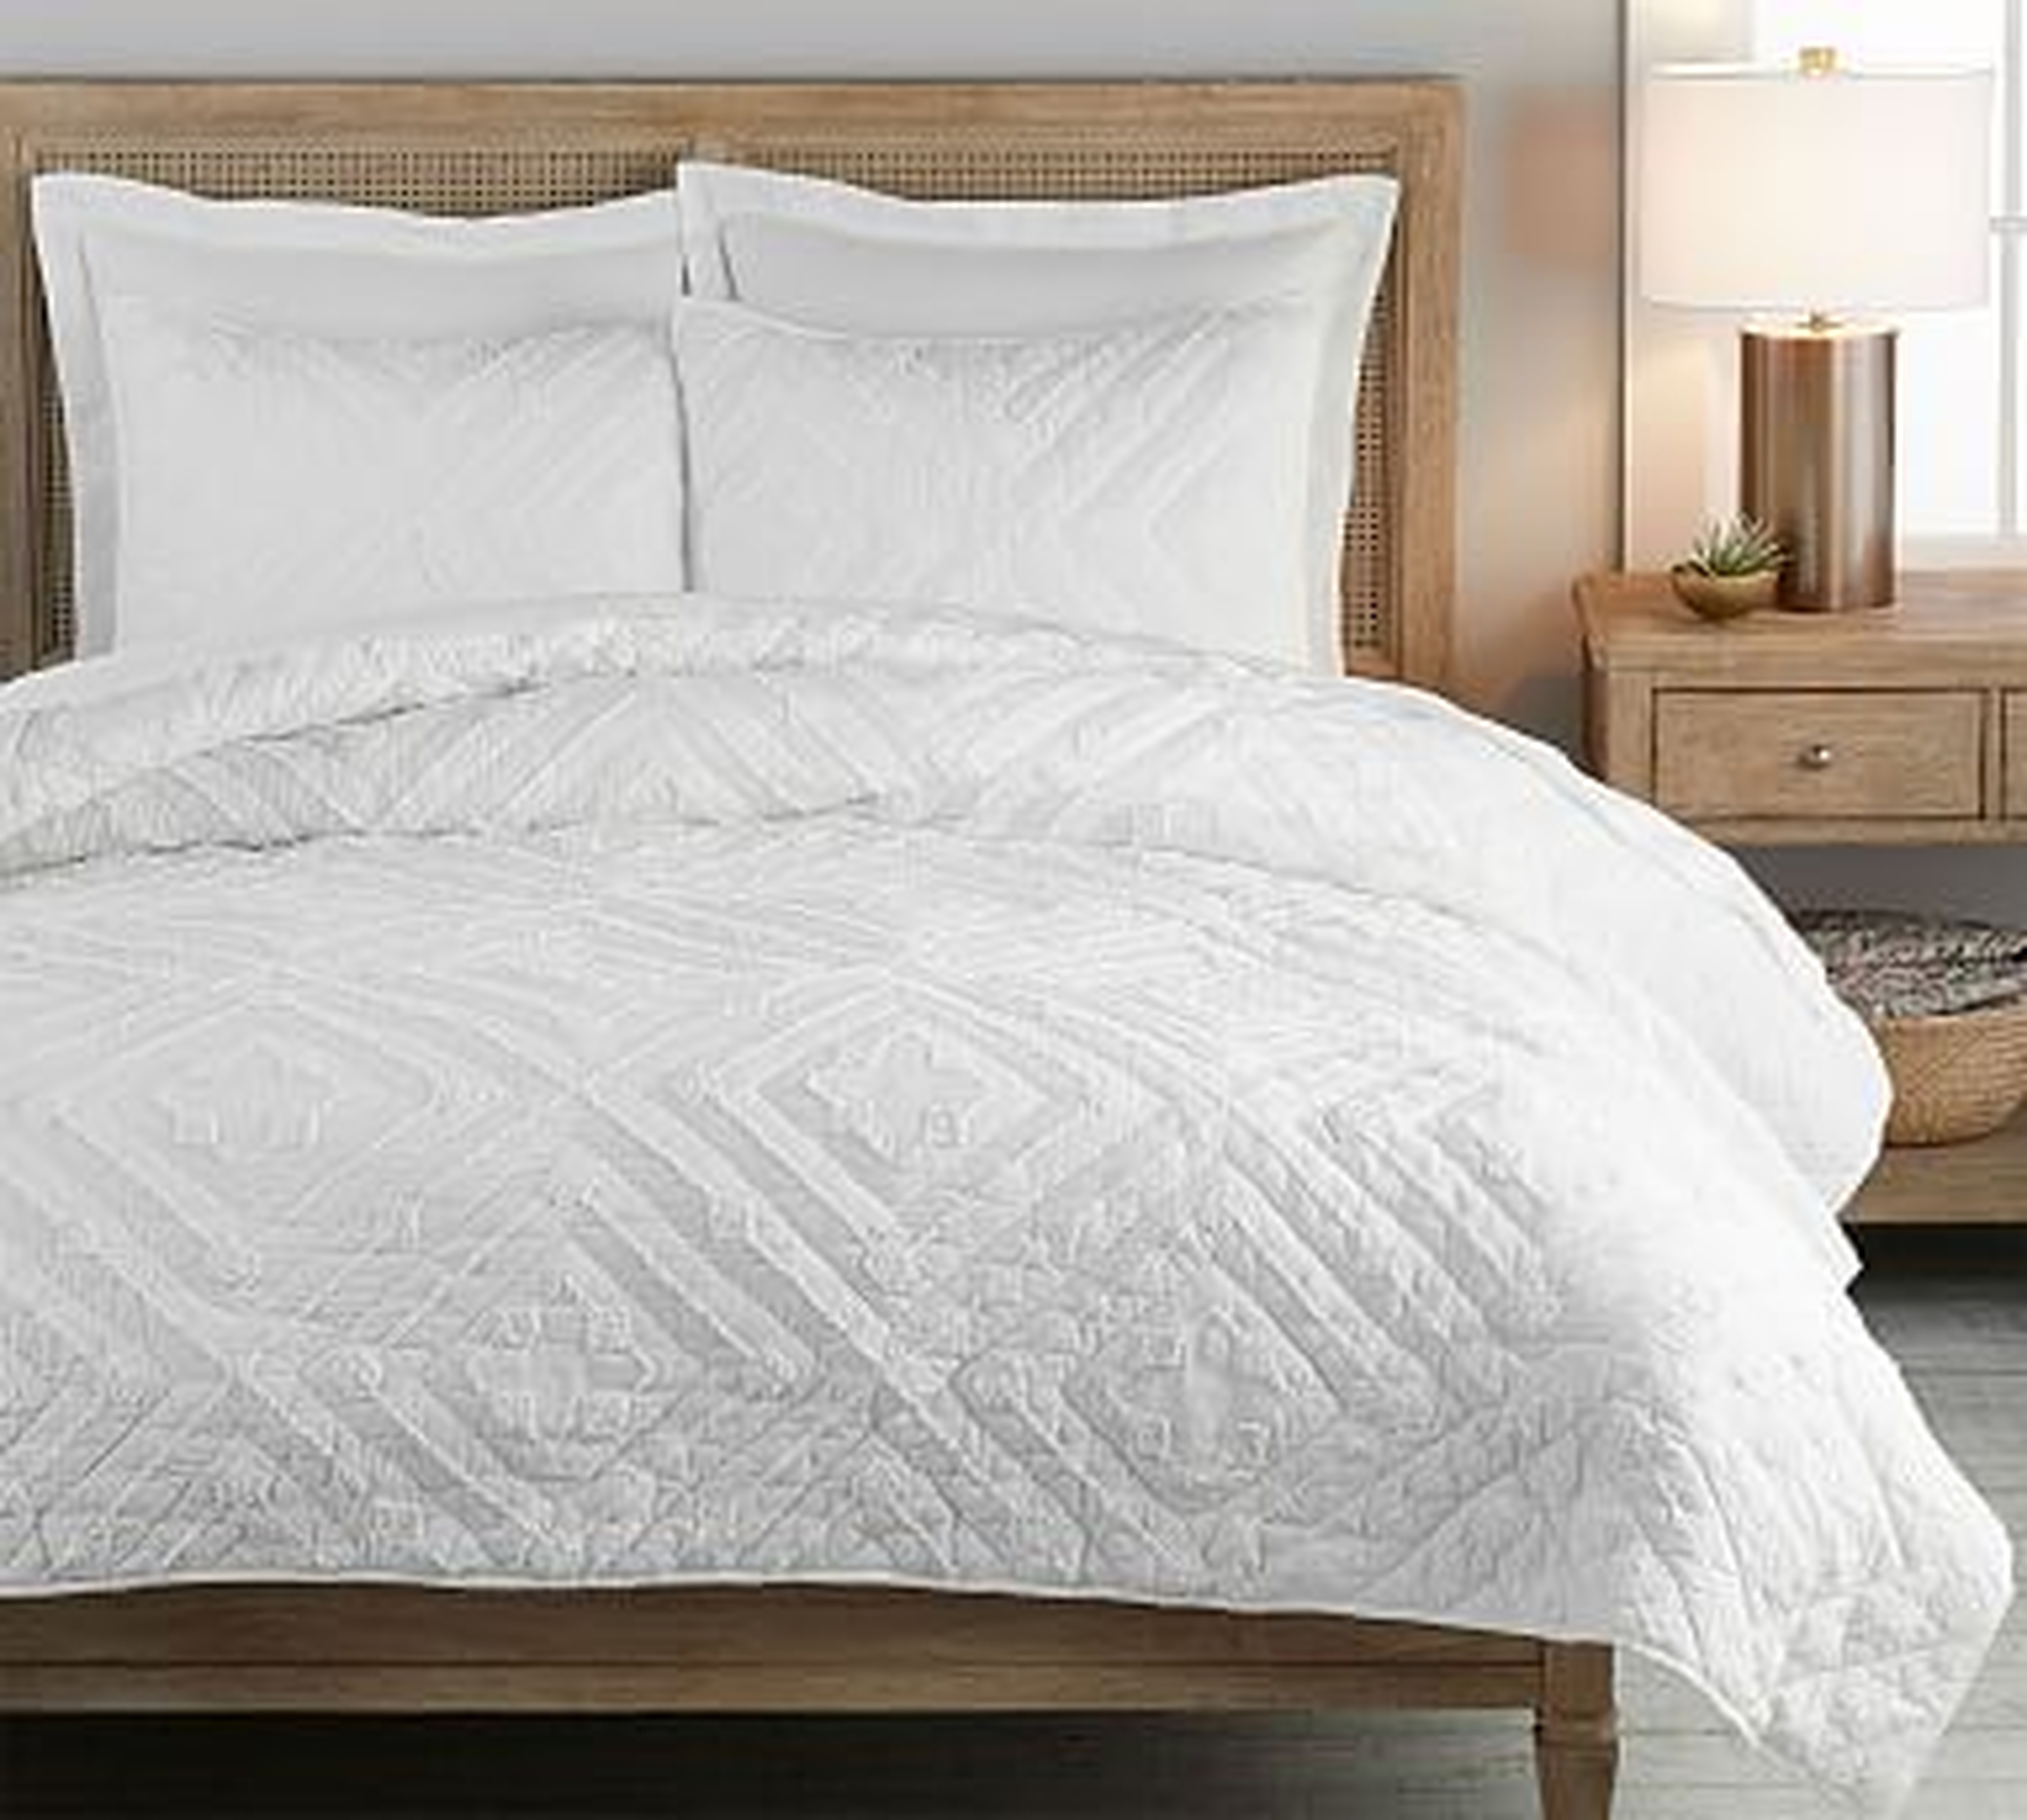 Diamond Candlewick Cotton Quilt, King/Cal King, White - Pottery Barn